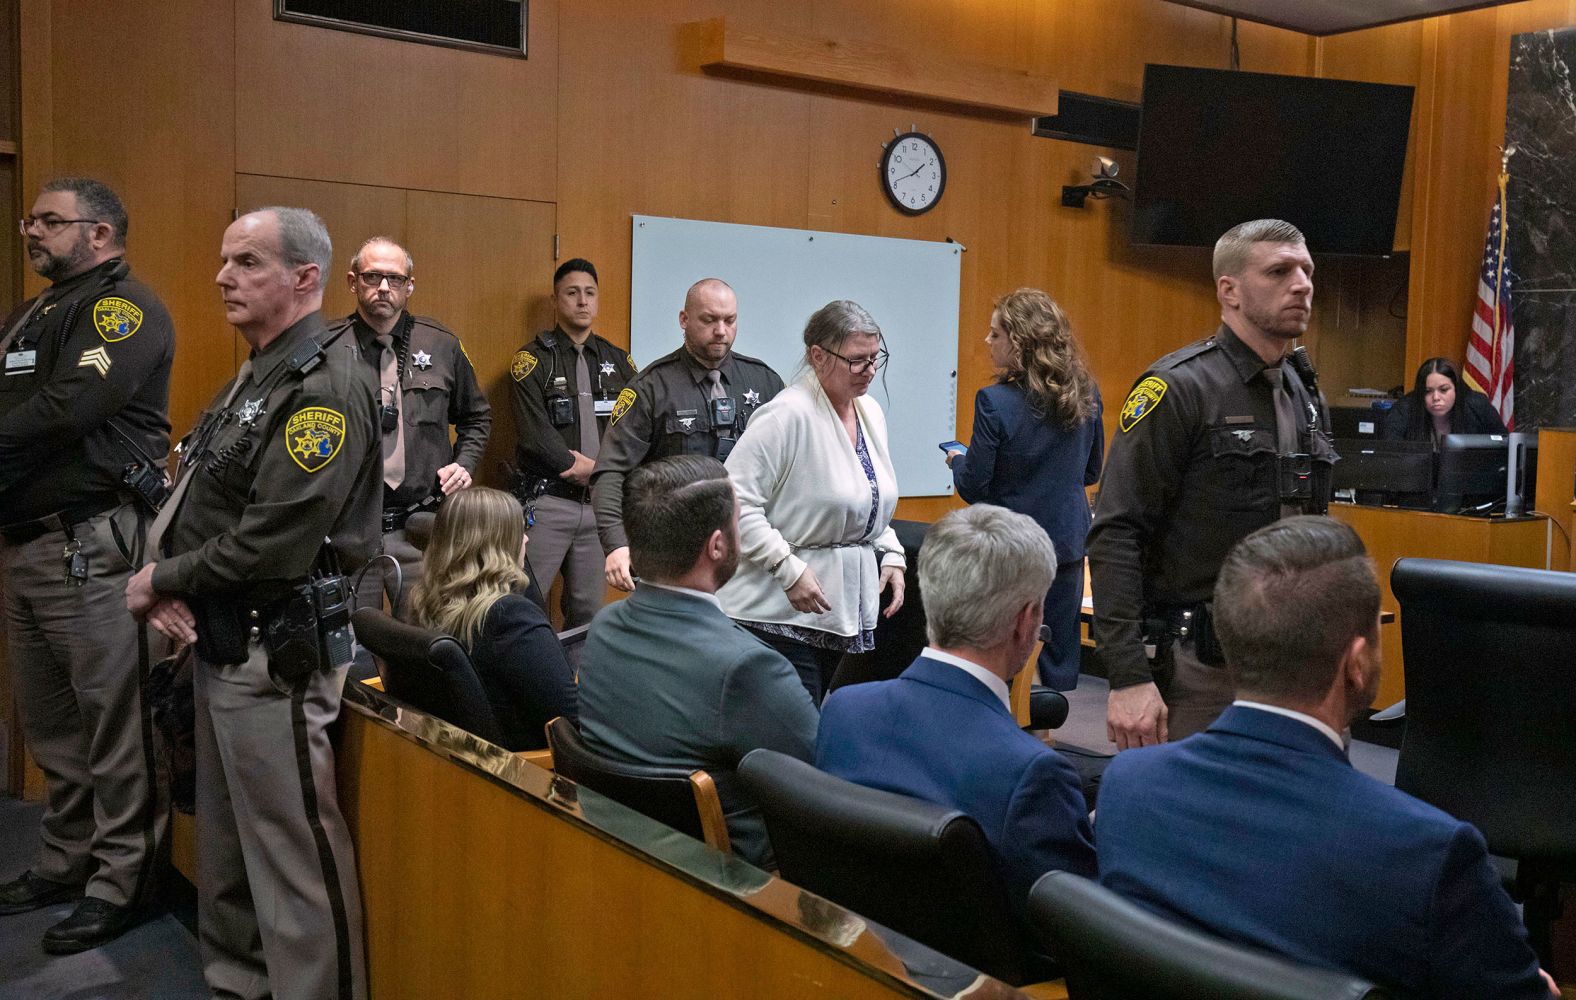 Jennifer Crumbley, the mother of the teenager who killed four students at an Oxford, Michigan, high school in 2021, leaves a courtroom in Pontiac, Michigan, after <a href="index.php?page=&url=https%3A%2F%2Fwww.cnn.com%2F2024%2F02%2F06%2Fus%2Fjennifer-crumbley-oxford-shooting-trial%2Findex.html">she was found guilty of all four counts of involuntary manslaughter</a> on Tuesday, February 6. Her son, Ethan, killed four students and wounded six students and a teacher. While parents have previously faced liability for their child’s actions — such as with neglect or firearms charges — this was the first time a parent of a school shooter was held directly responsible for the killings. Her husband, James, is scheduled to go on trial on the same charges in early March.